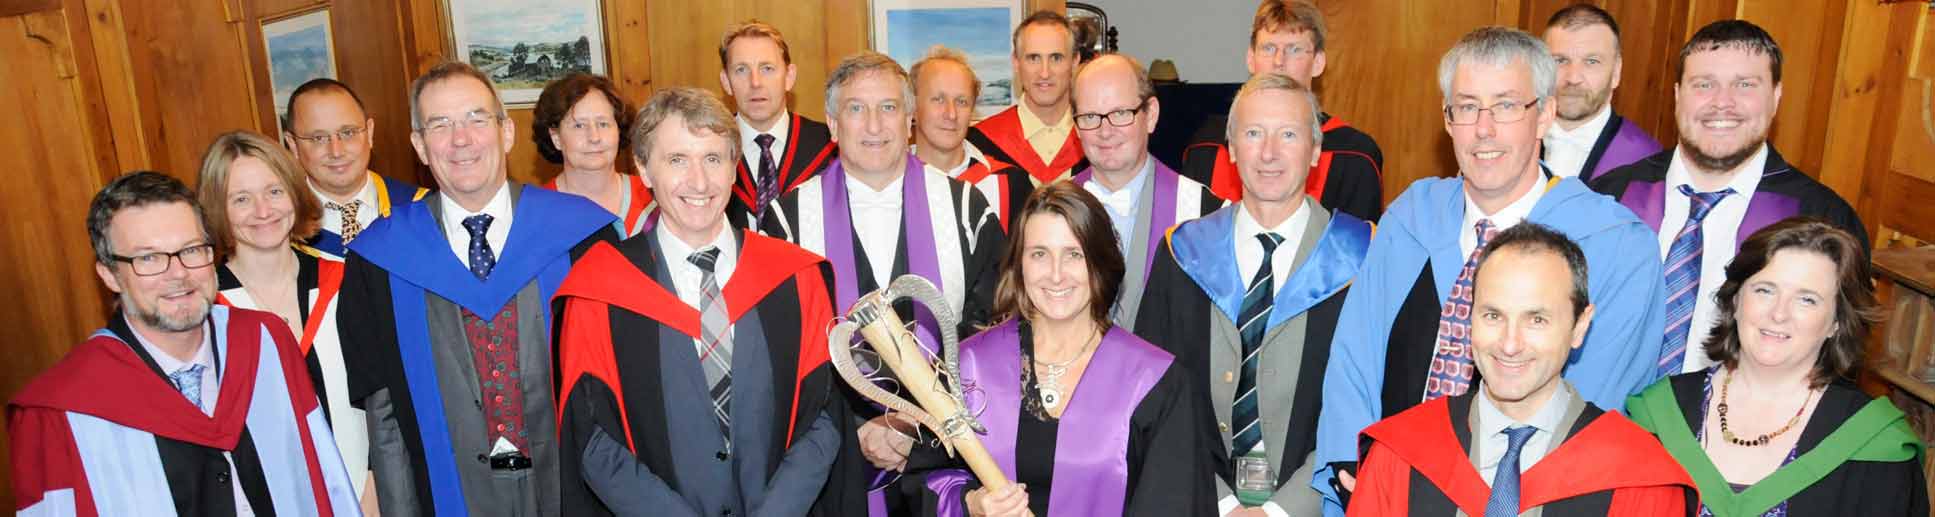 Formal gowns worn by the lecturers and university luminaries during a SAMS UHI graduation